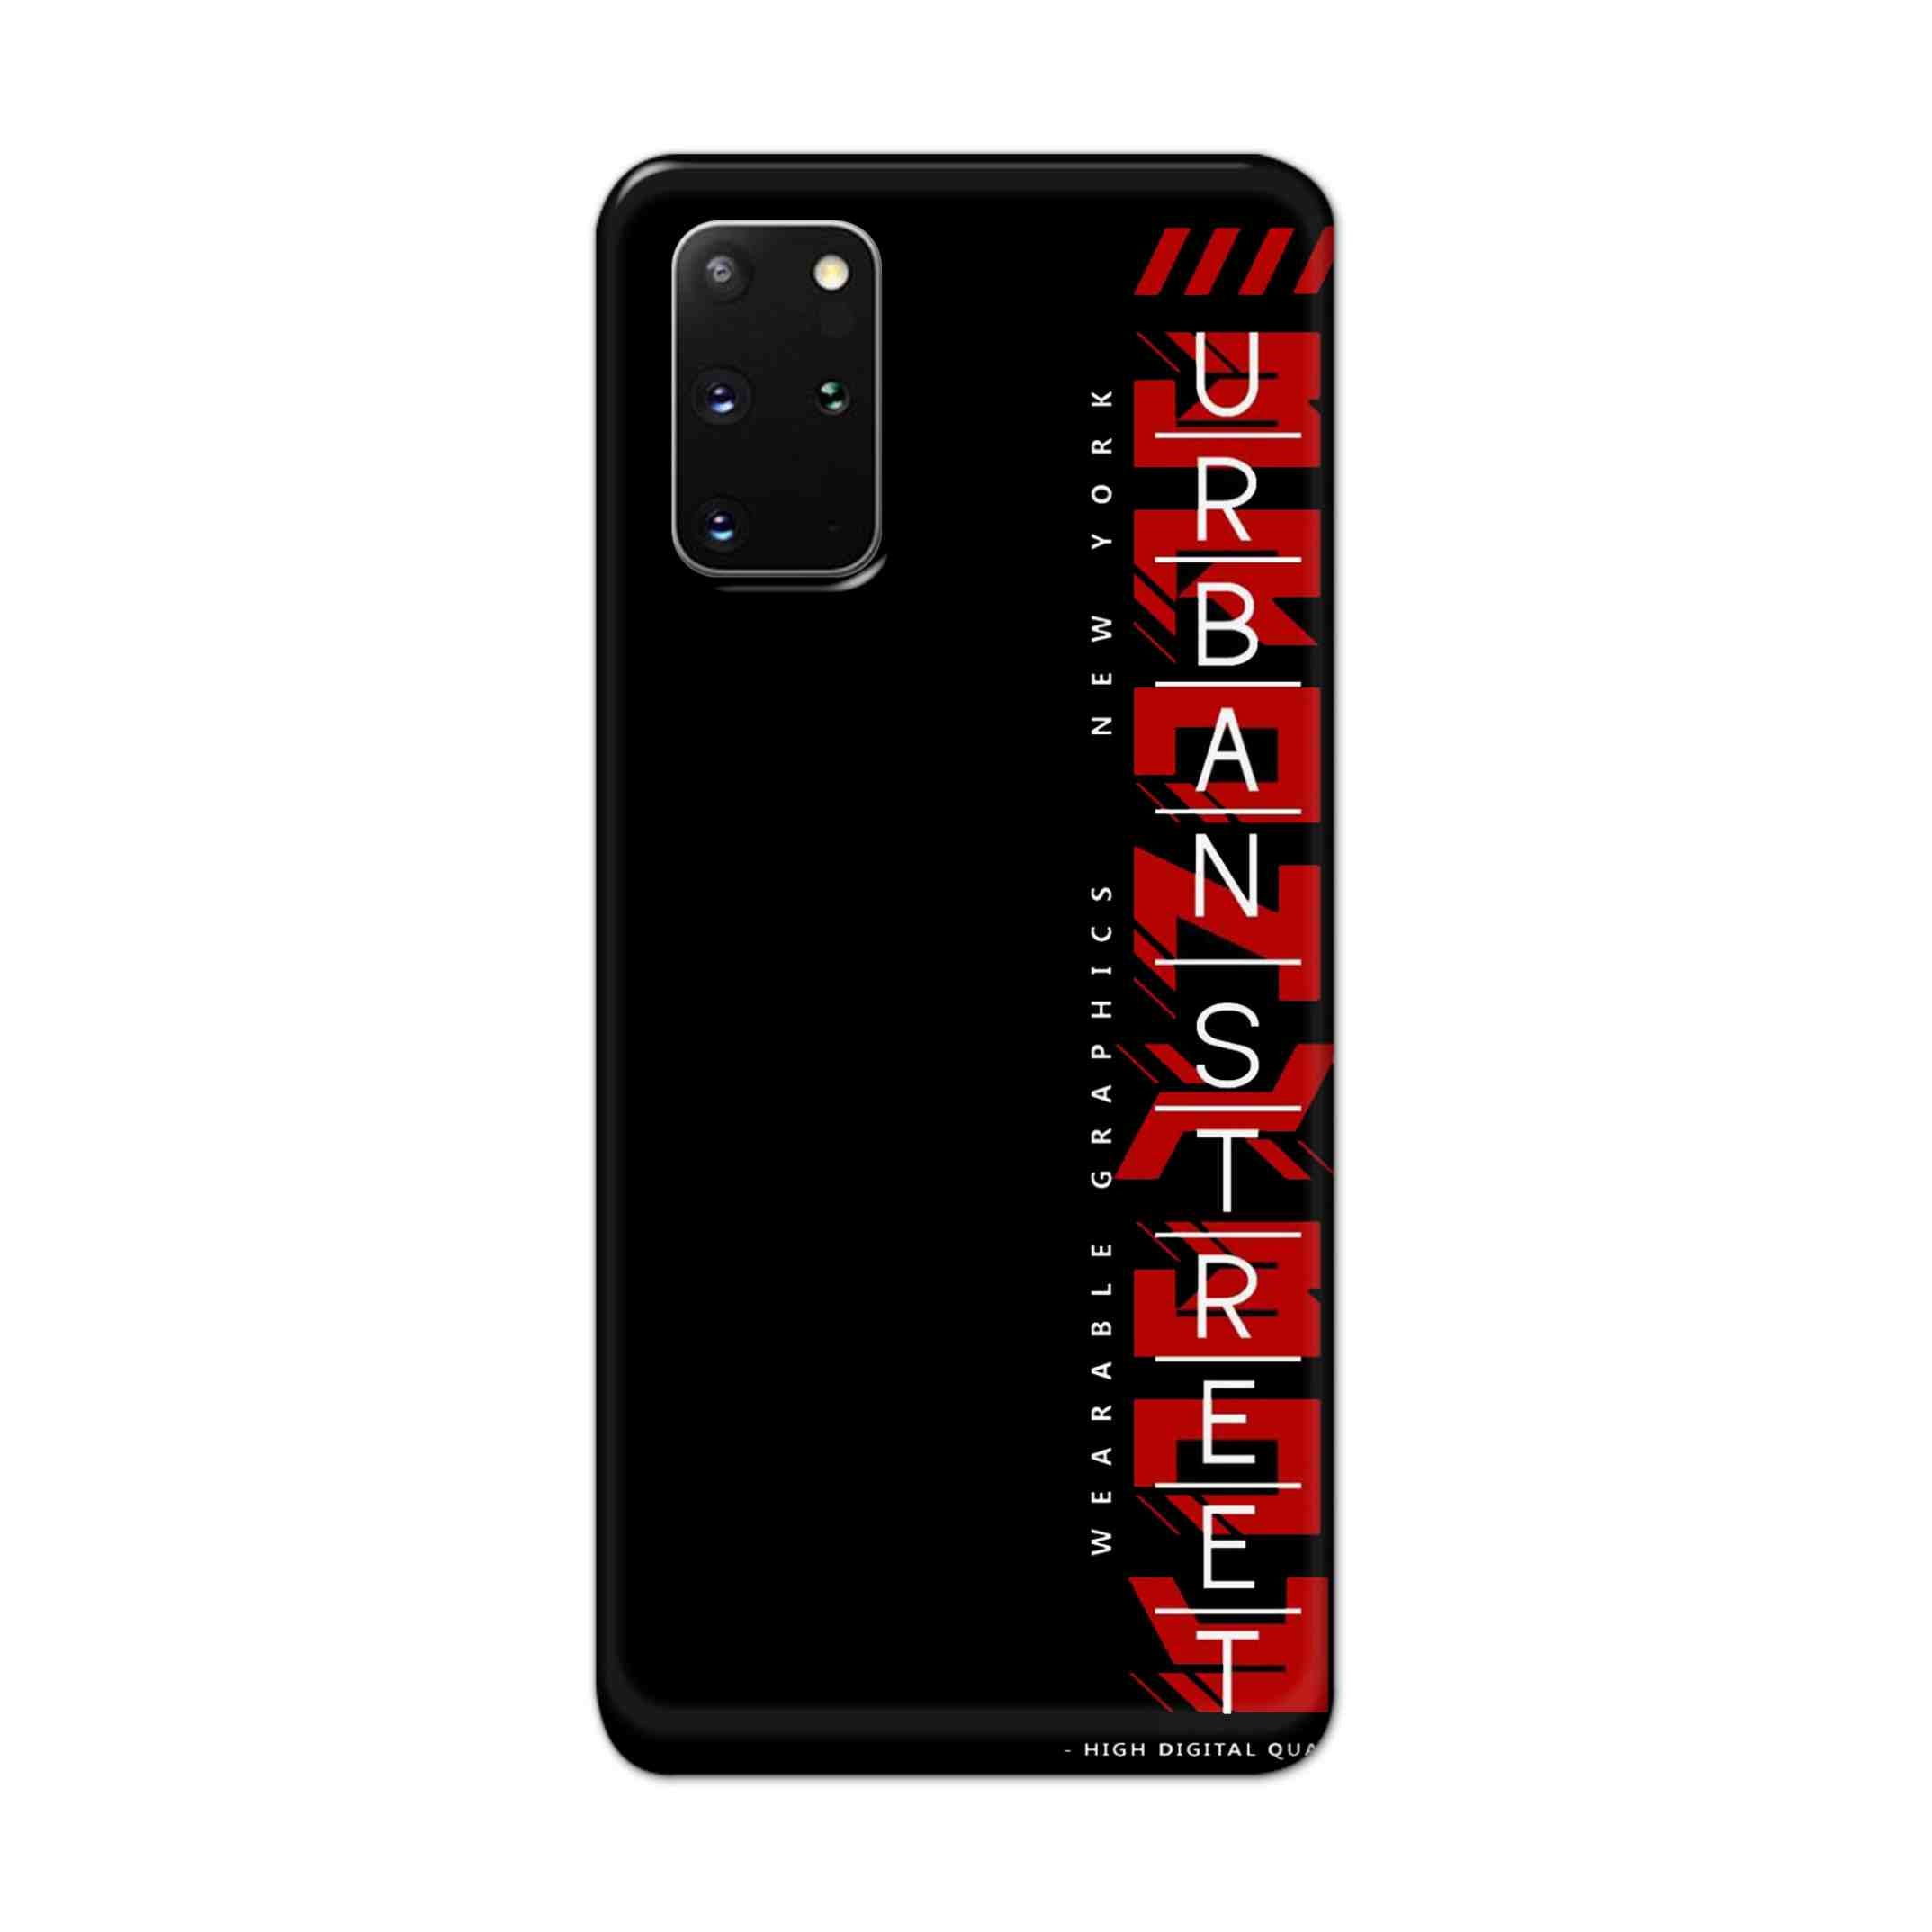 Buy Urban Street Hard Back Mobile Phone Case Cover For Samsung Galaxy S20 Plus Online